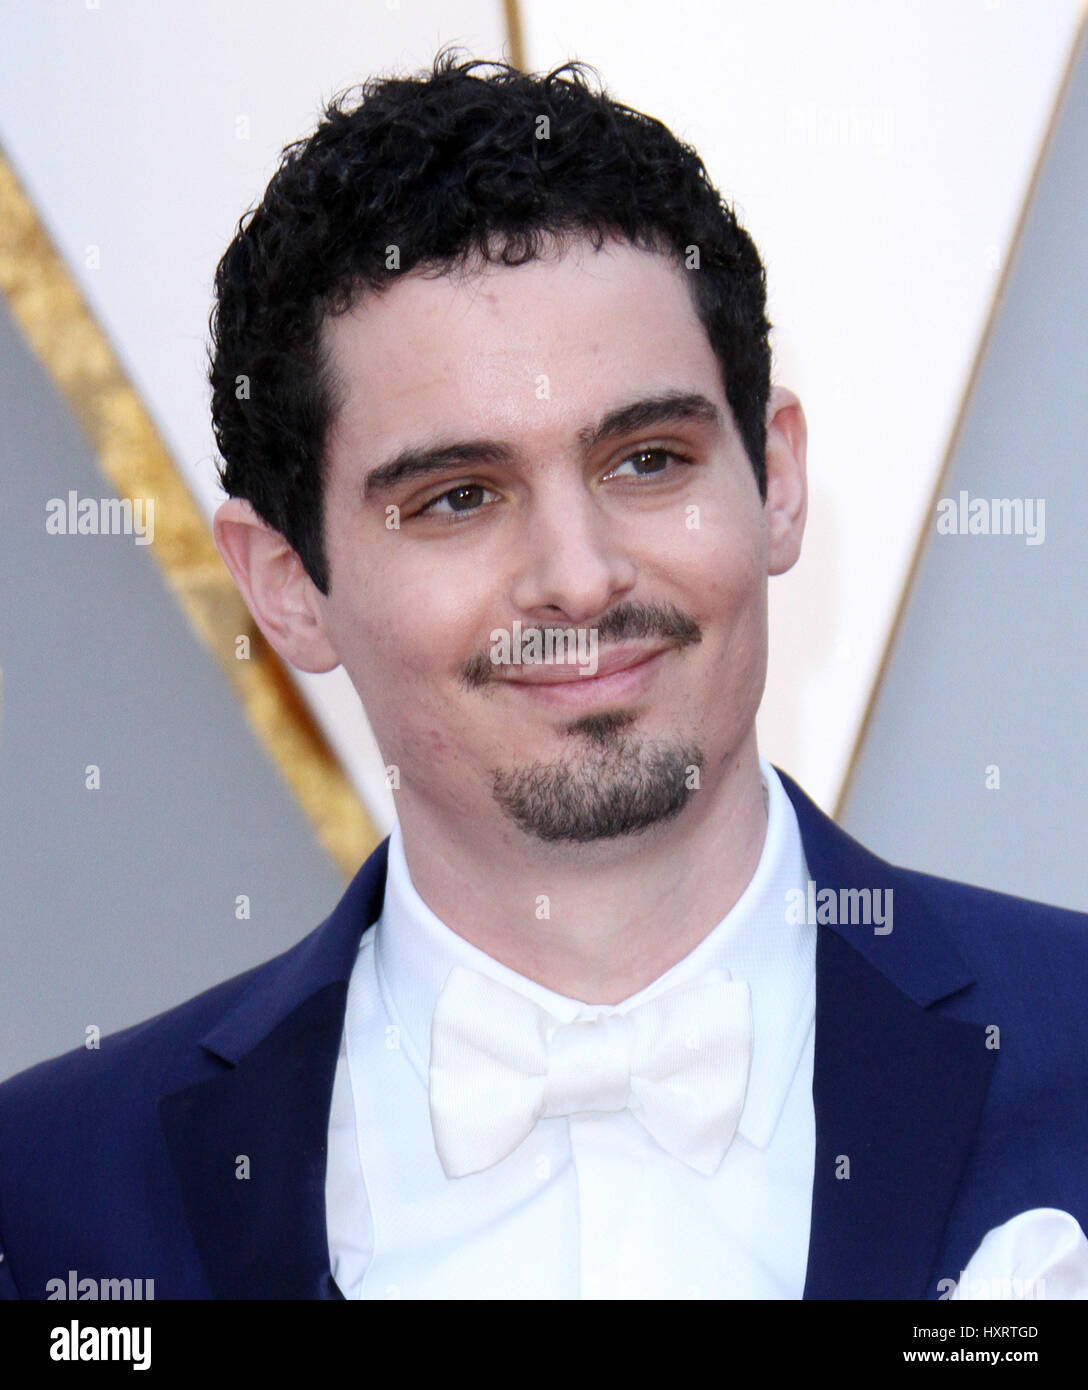 89th Annual Academy Awards held at the Dolby Theatre at the Hollywood & Highland Center  Featuring: Damien Chazelle Where: Los Angeles, California, United States When: 26 Feb 2017 Stock Photo